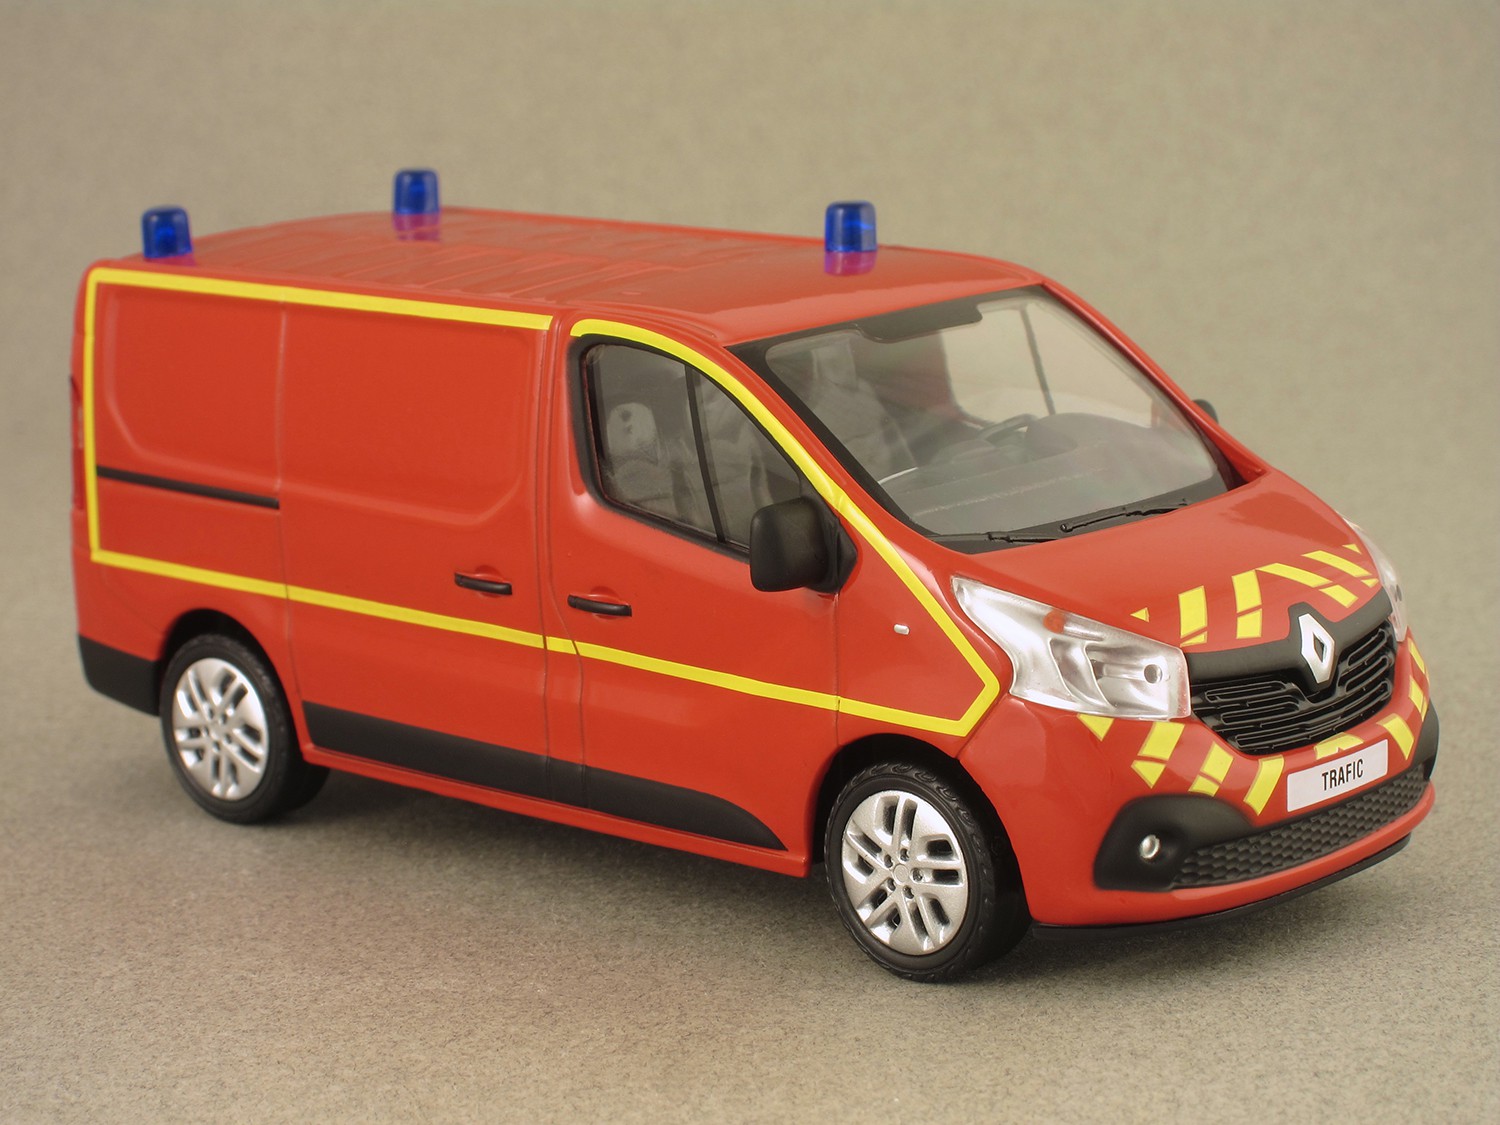 Renault Trafic 2014 Fire Rescue (Norev) 1:43